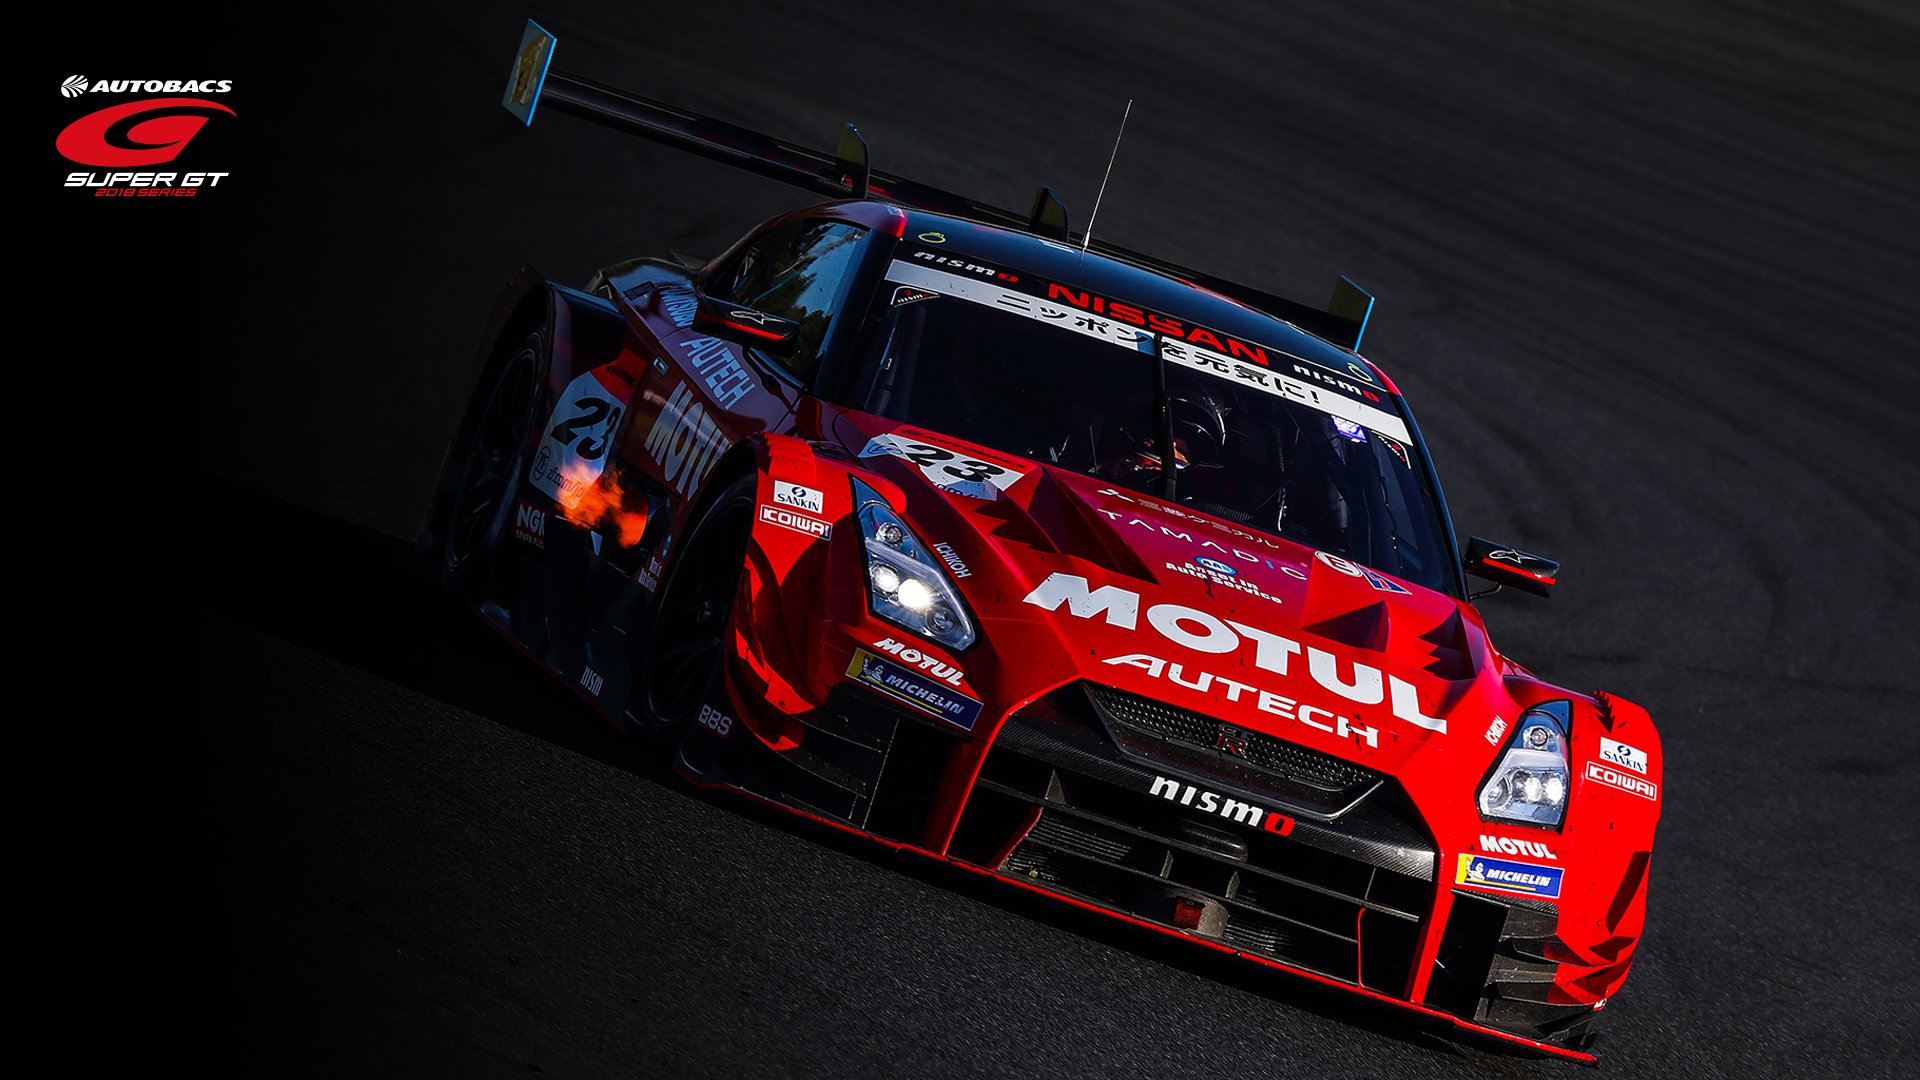 Twitter 上的 公式 Super Gt Wallpaper Round 2 Fuji Gt500クラス 23号車 T Co 8xahh0rmre Supergt T Co H6m228zf5v Twitter